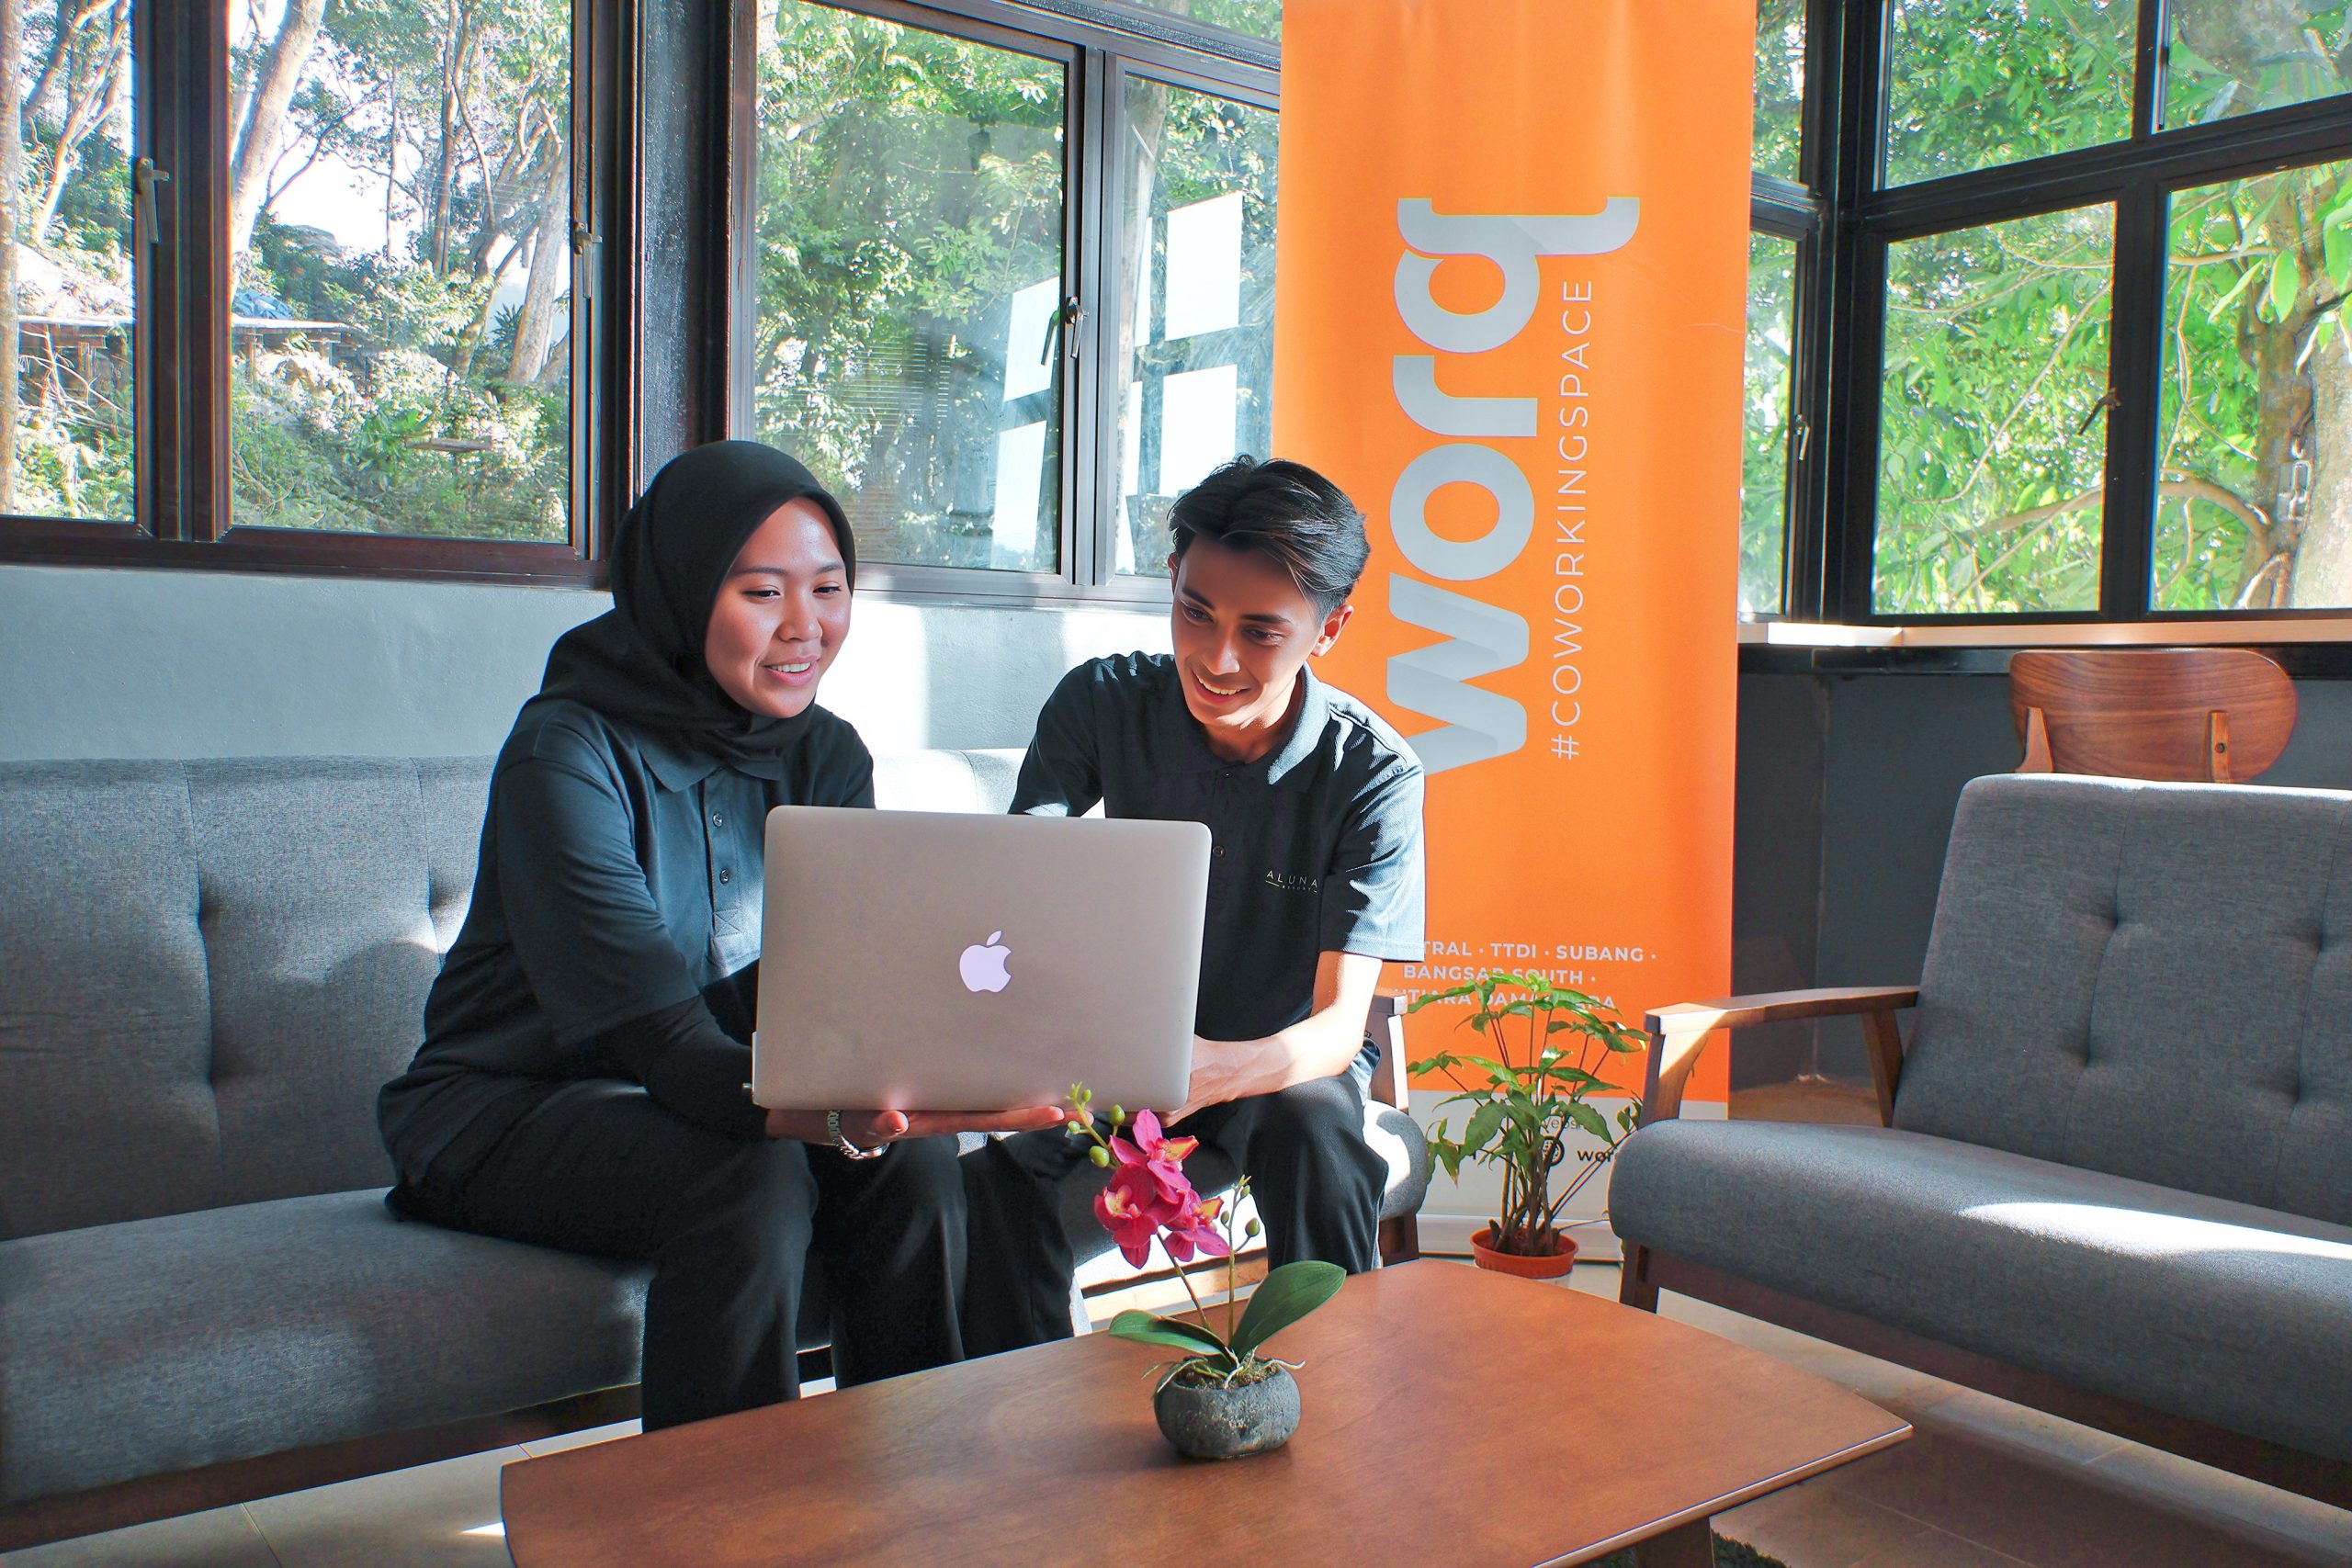 WORQ launches WORQ Express, a self-service coworking space on Pulau Perhentian, enabling flexible work from anywhere